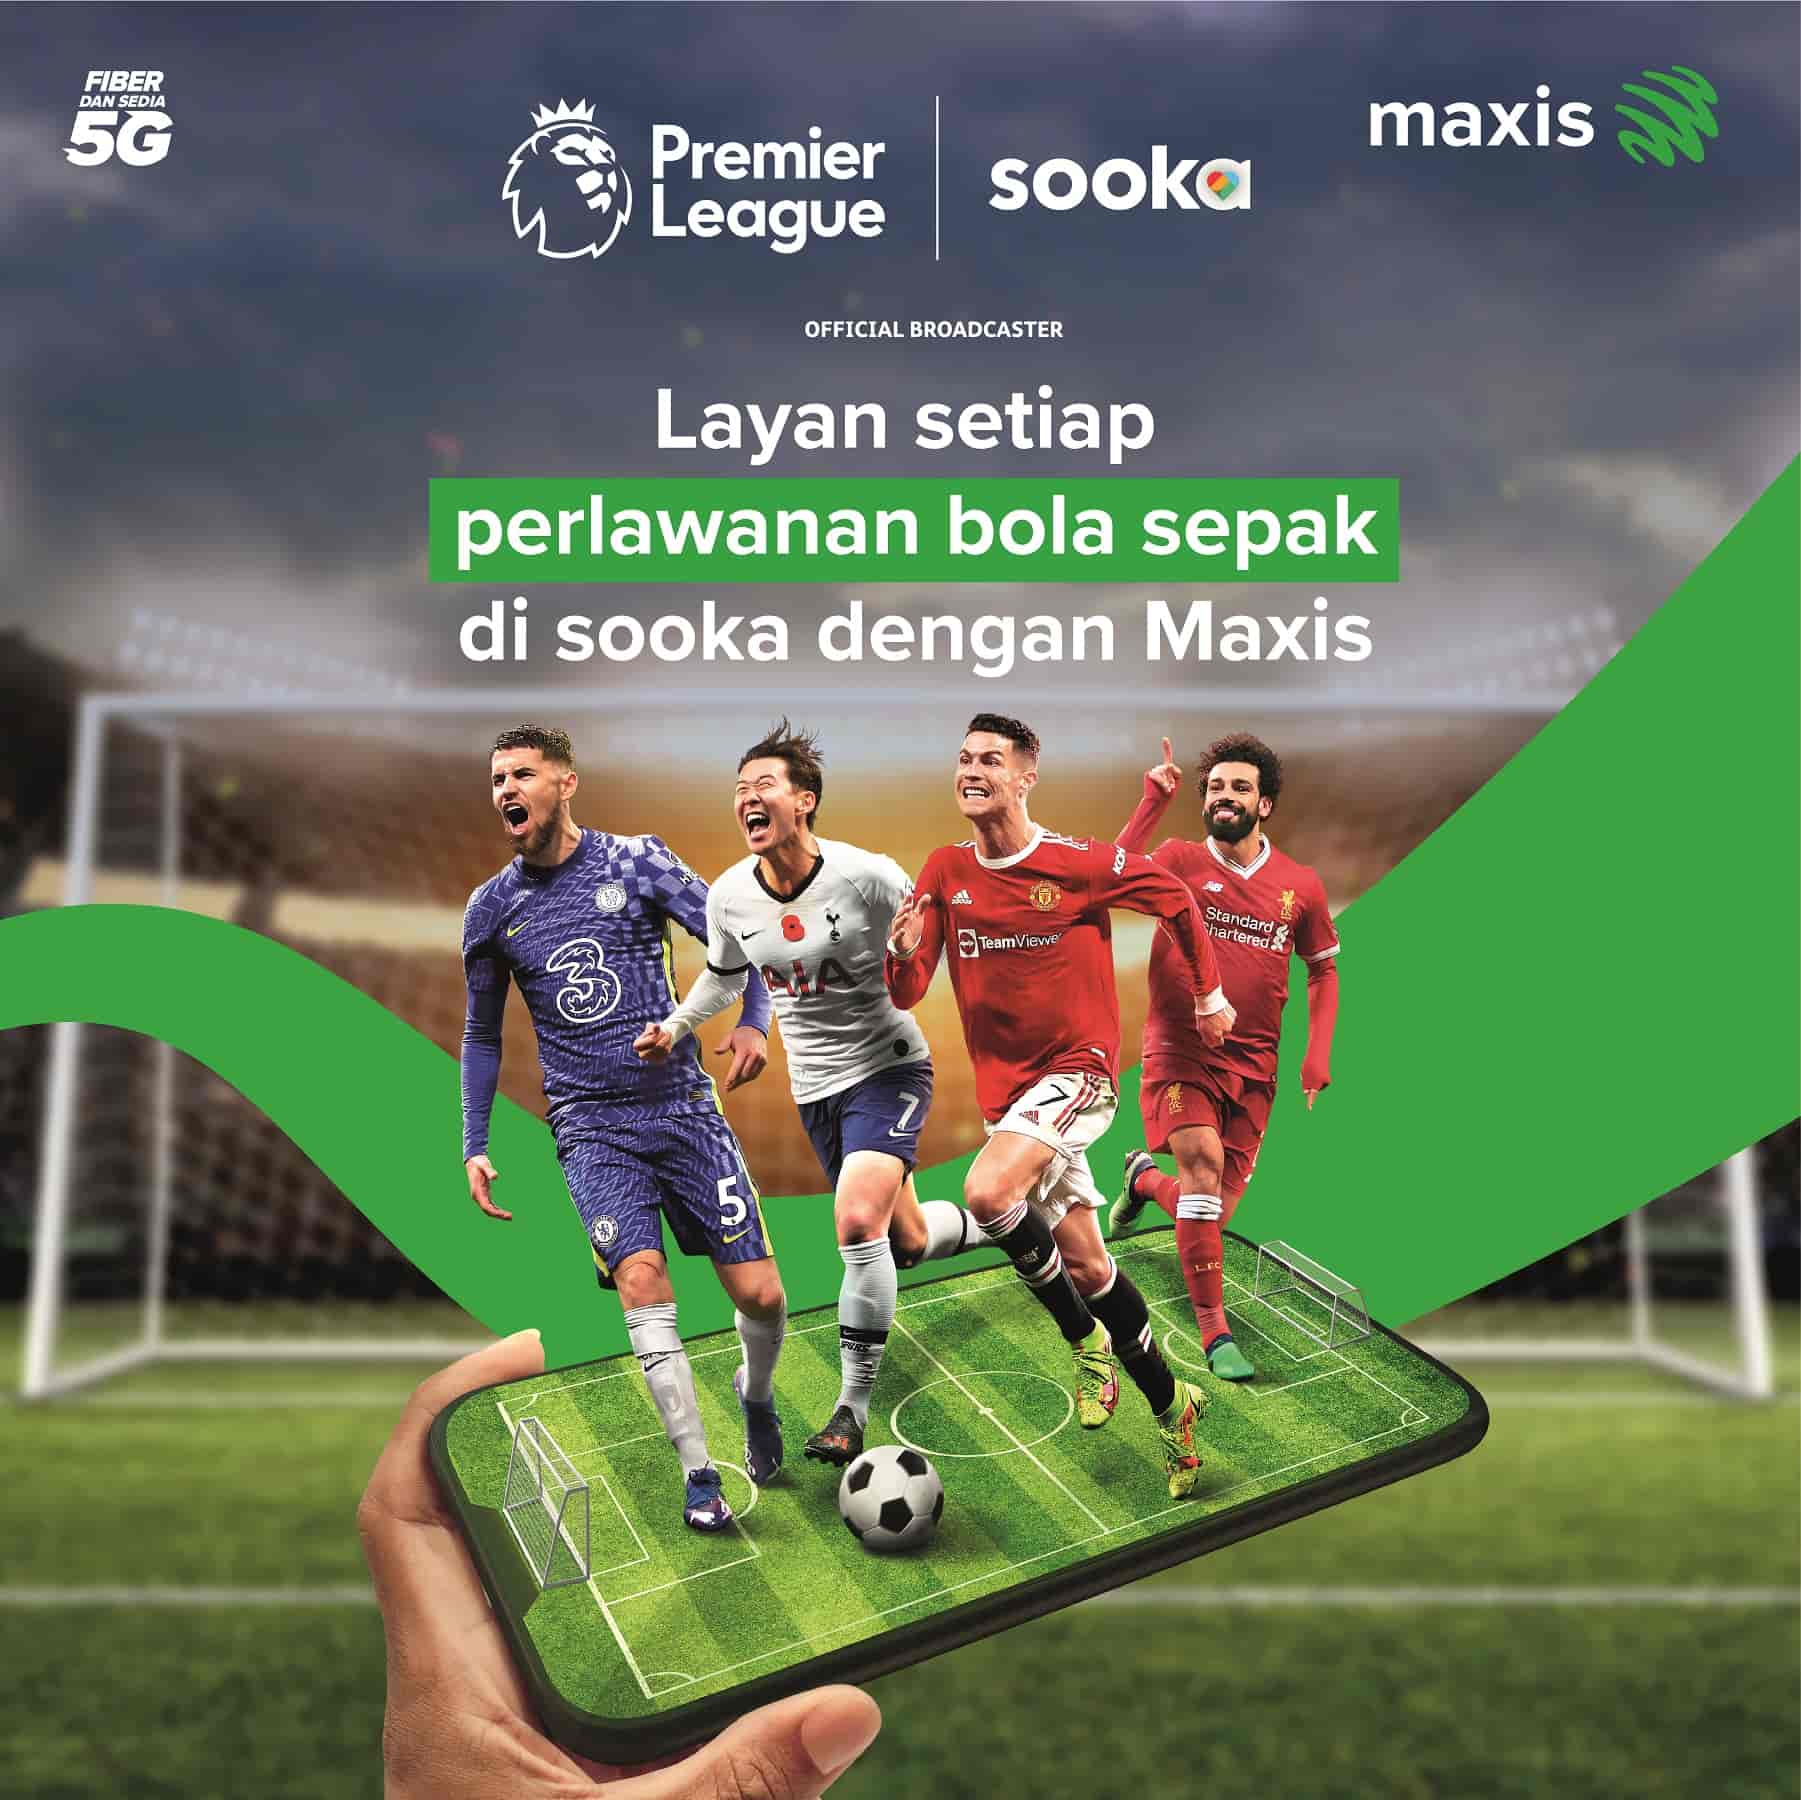 Maxis and sooka collaborate to bring unique mobile bundles for the best in sports and entertainment